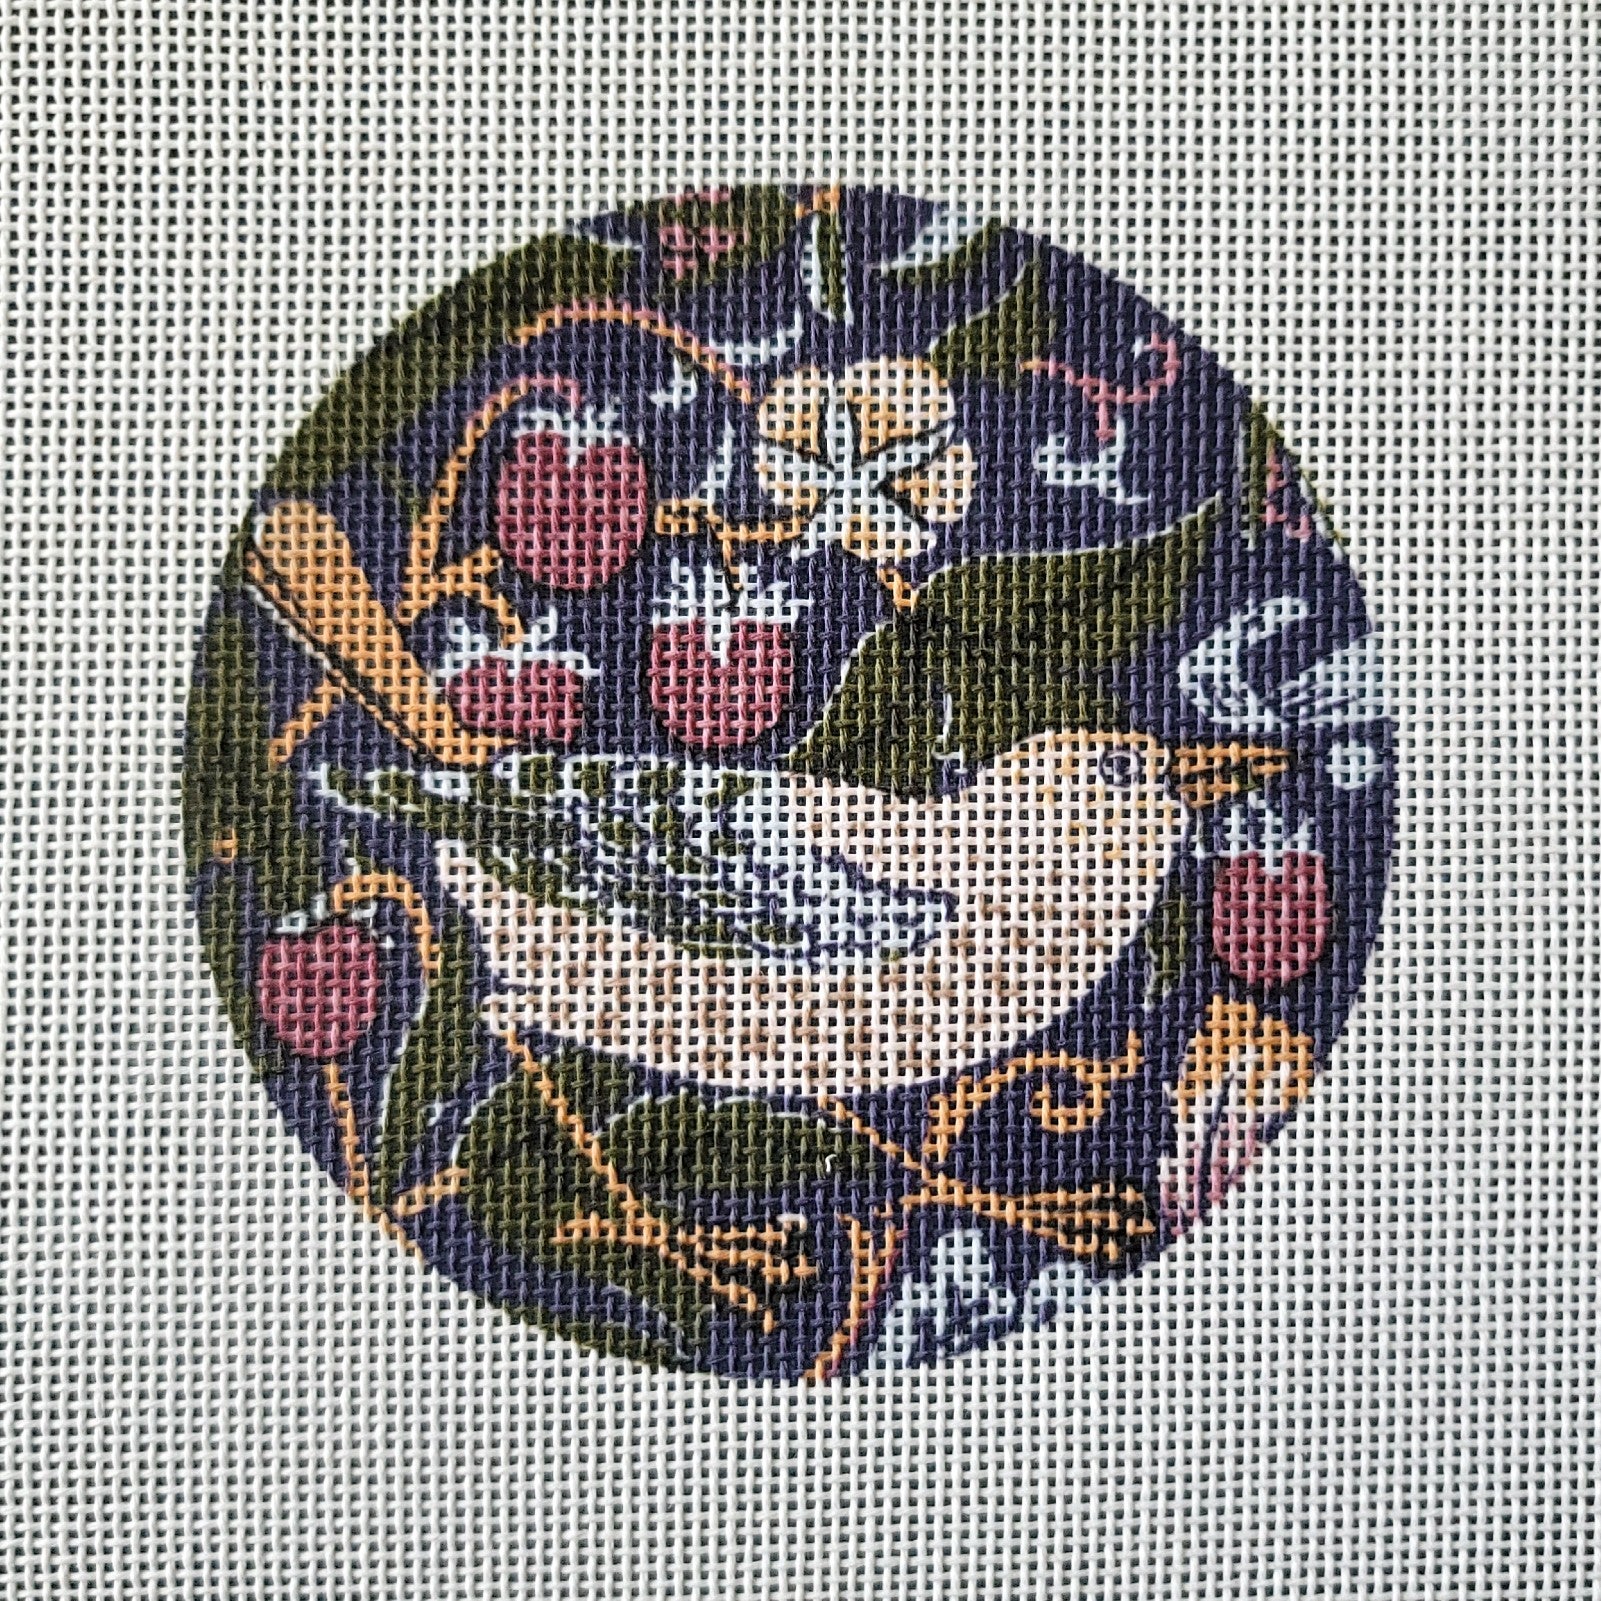 Strawberry Thief needlepoint ornament kit with William Morris design.